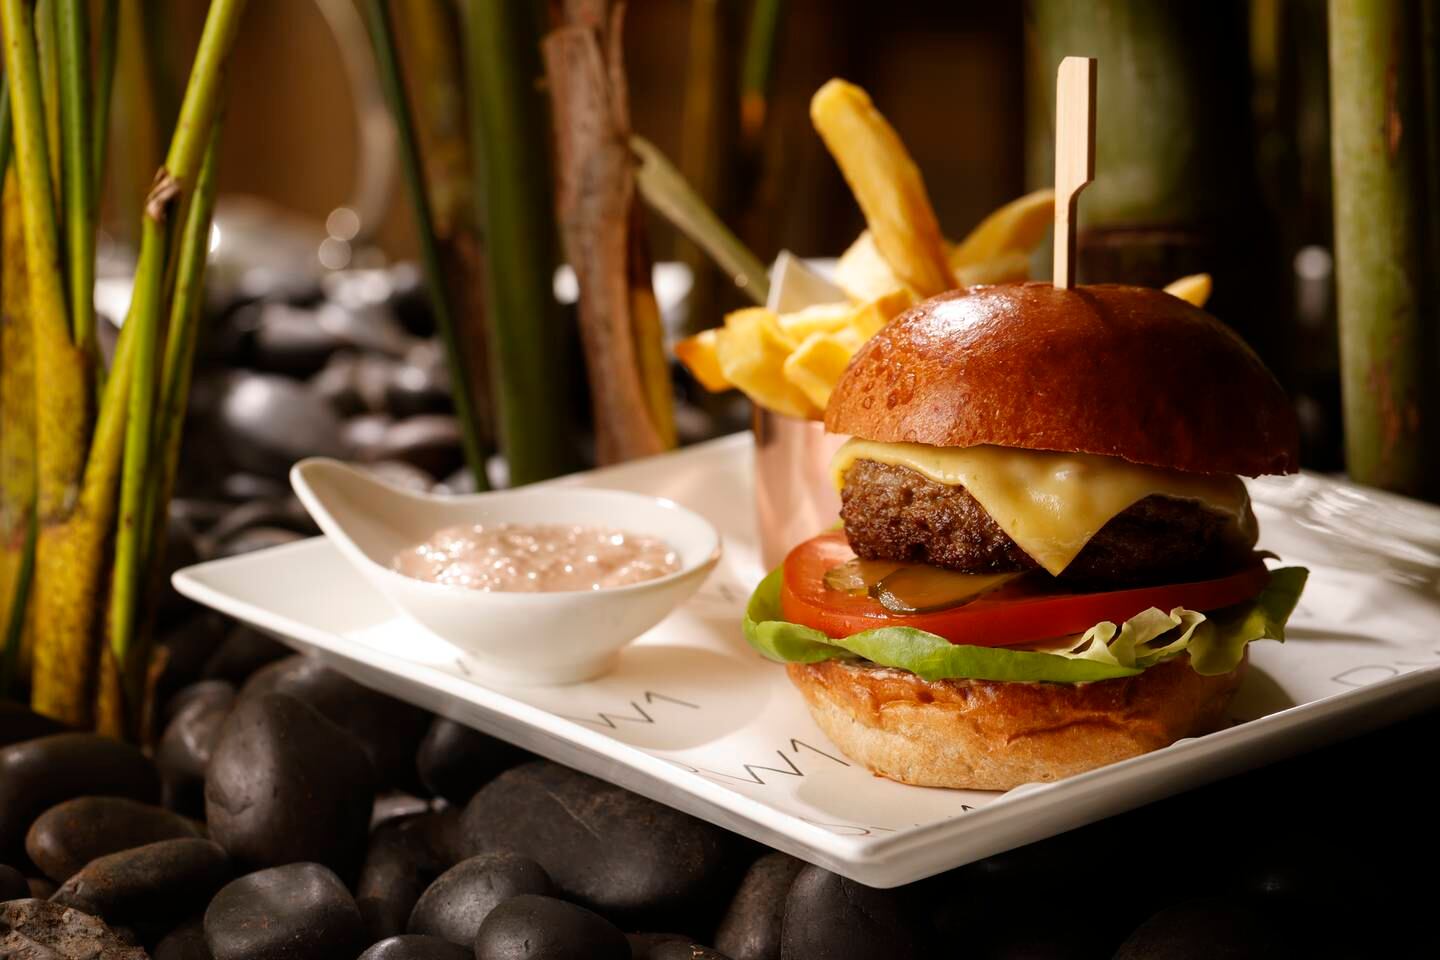 A new dish on the menu is the RW1 beef brisket burger. Photo: Rhodes W1